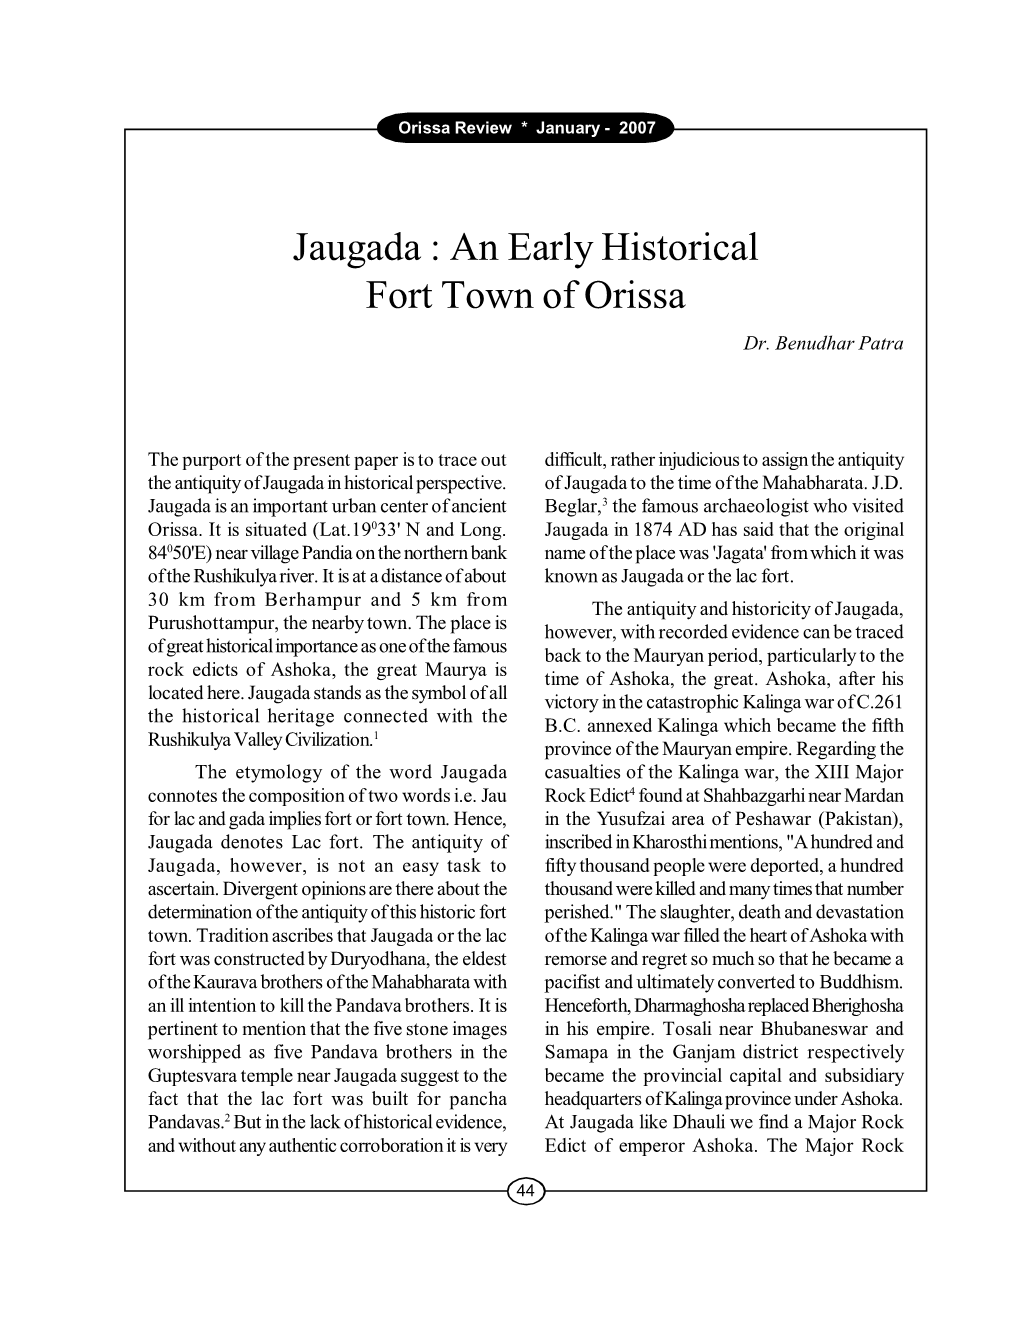 Jaugada : an Early Historical Fort Town of Orissa Dr